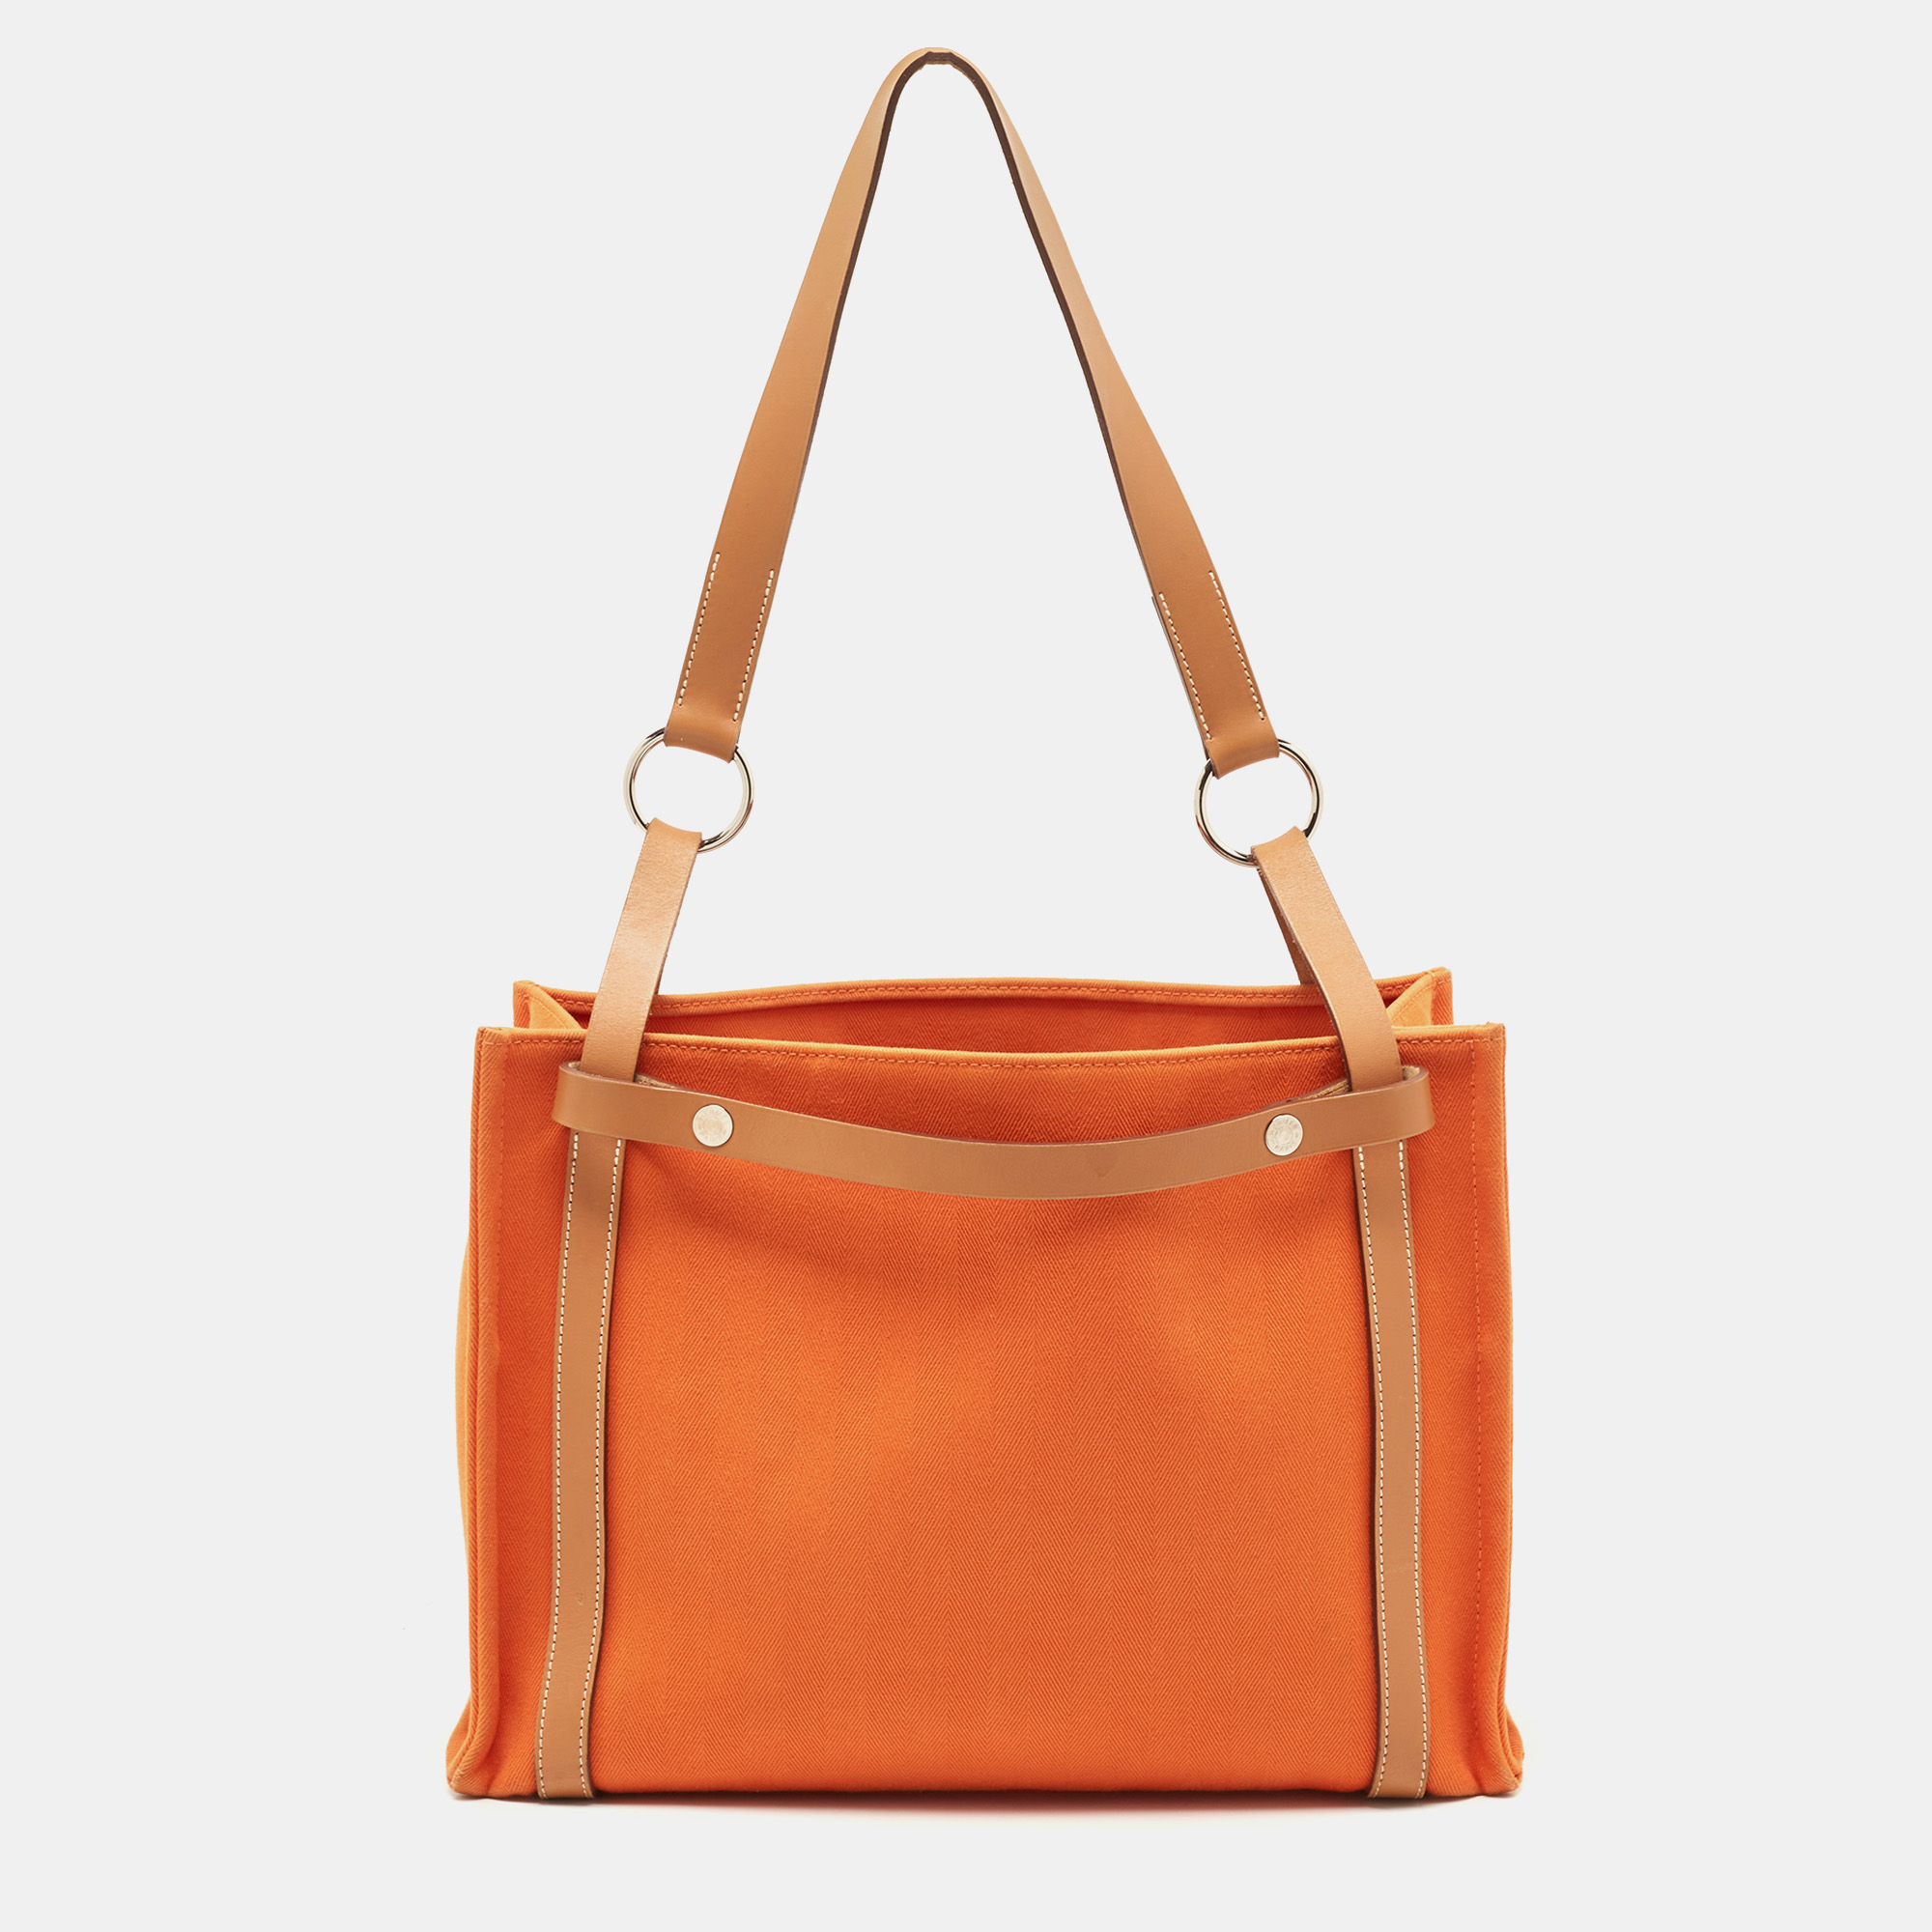 Hermes Orange/Natural Canvas and Leather Cabalicol Bag